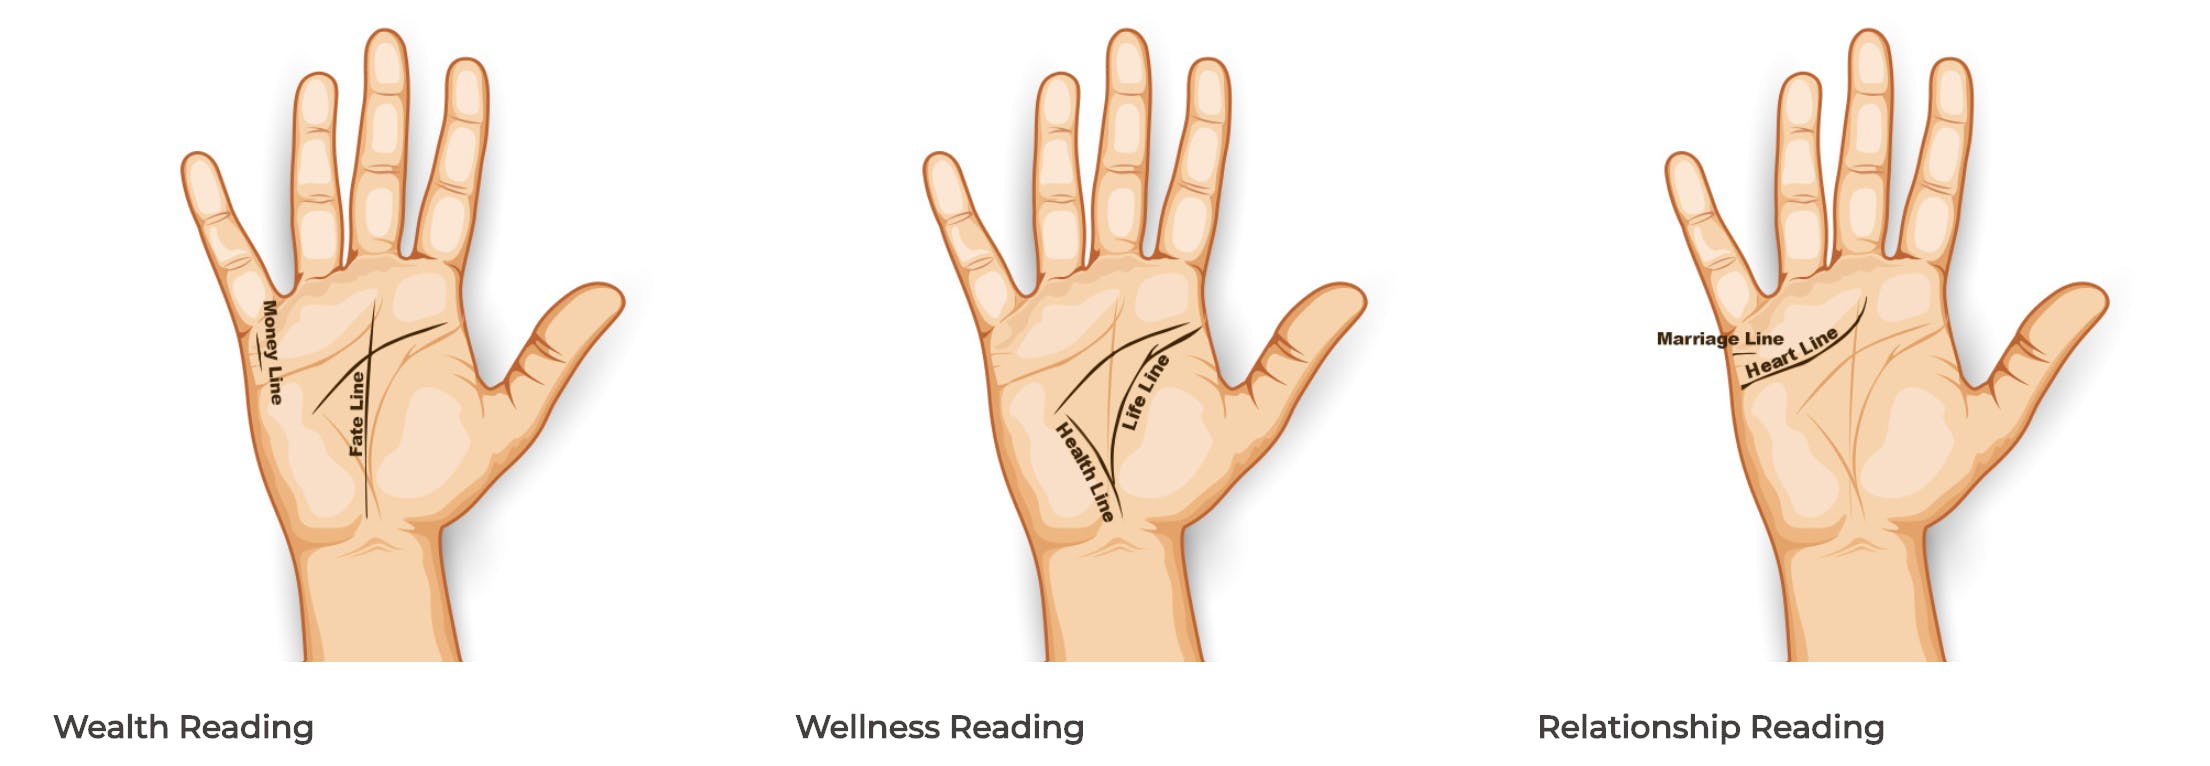 palm reading online